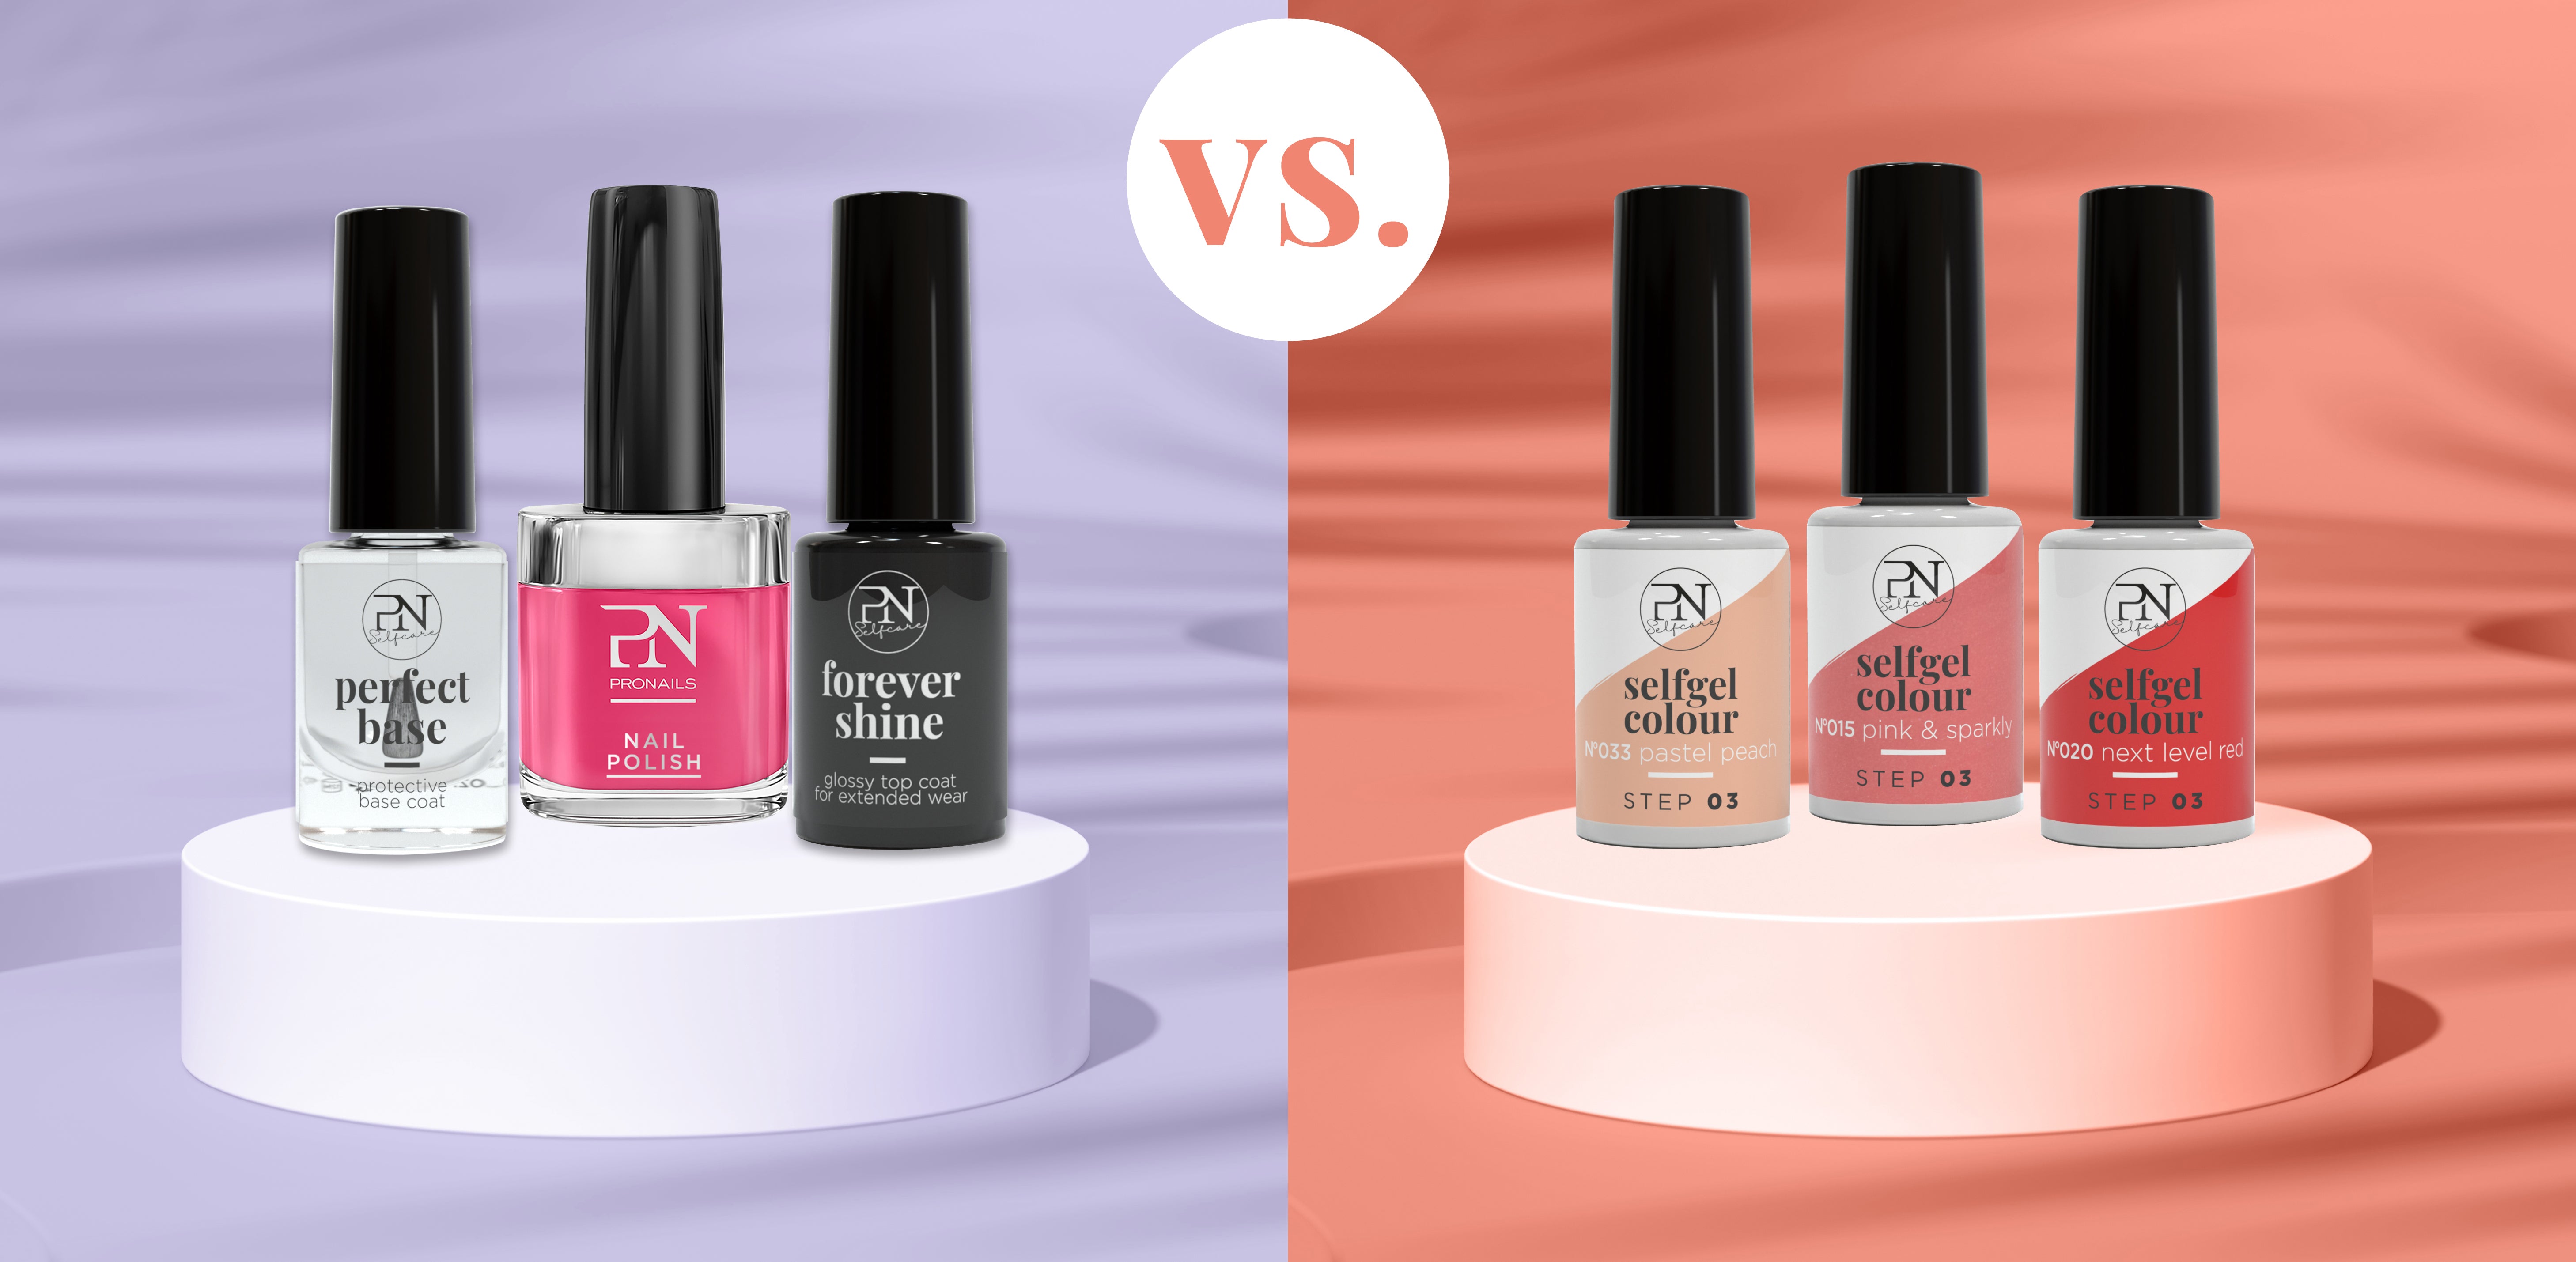 What Is The Difference Between Regular Nail Polish And Gel Polish? | PN ...